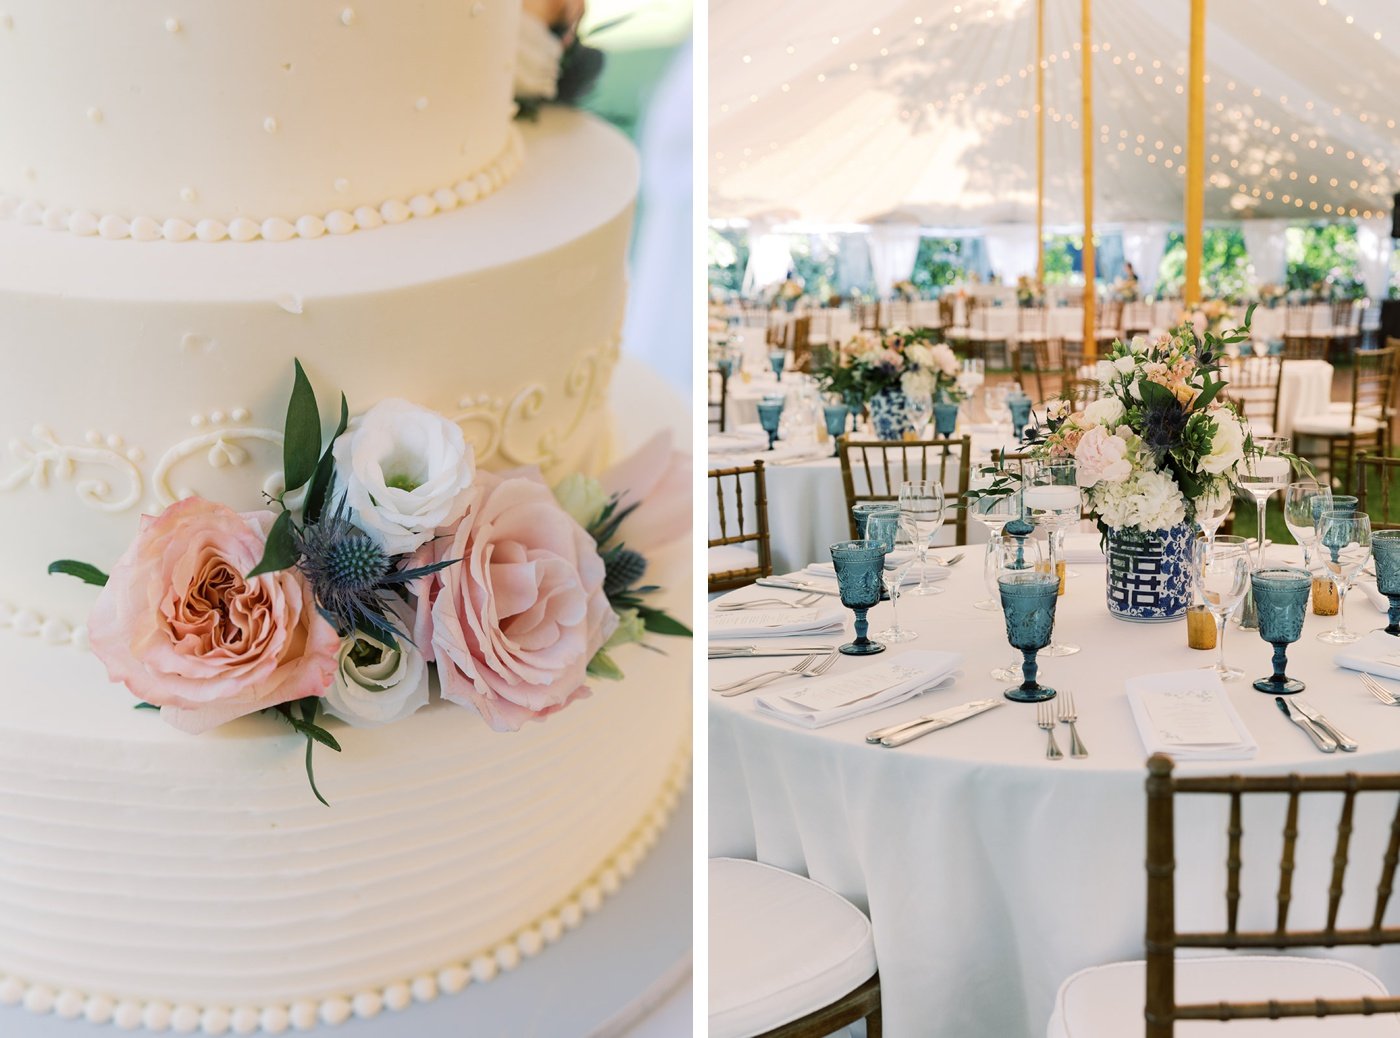 Fresh pink, blue, and white flowers decorating a wedding cake 